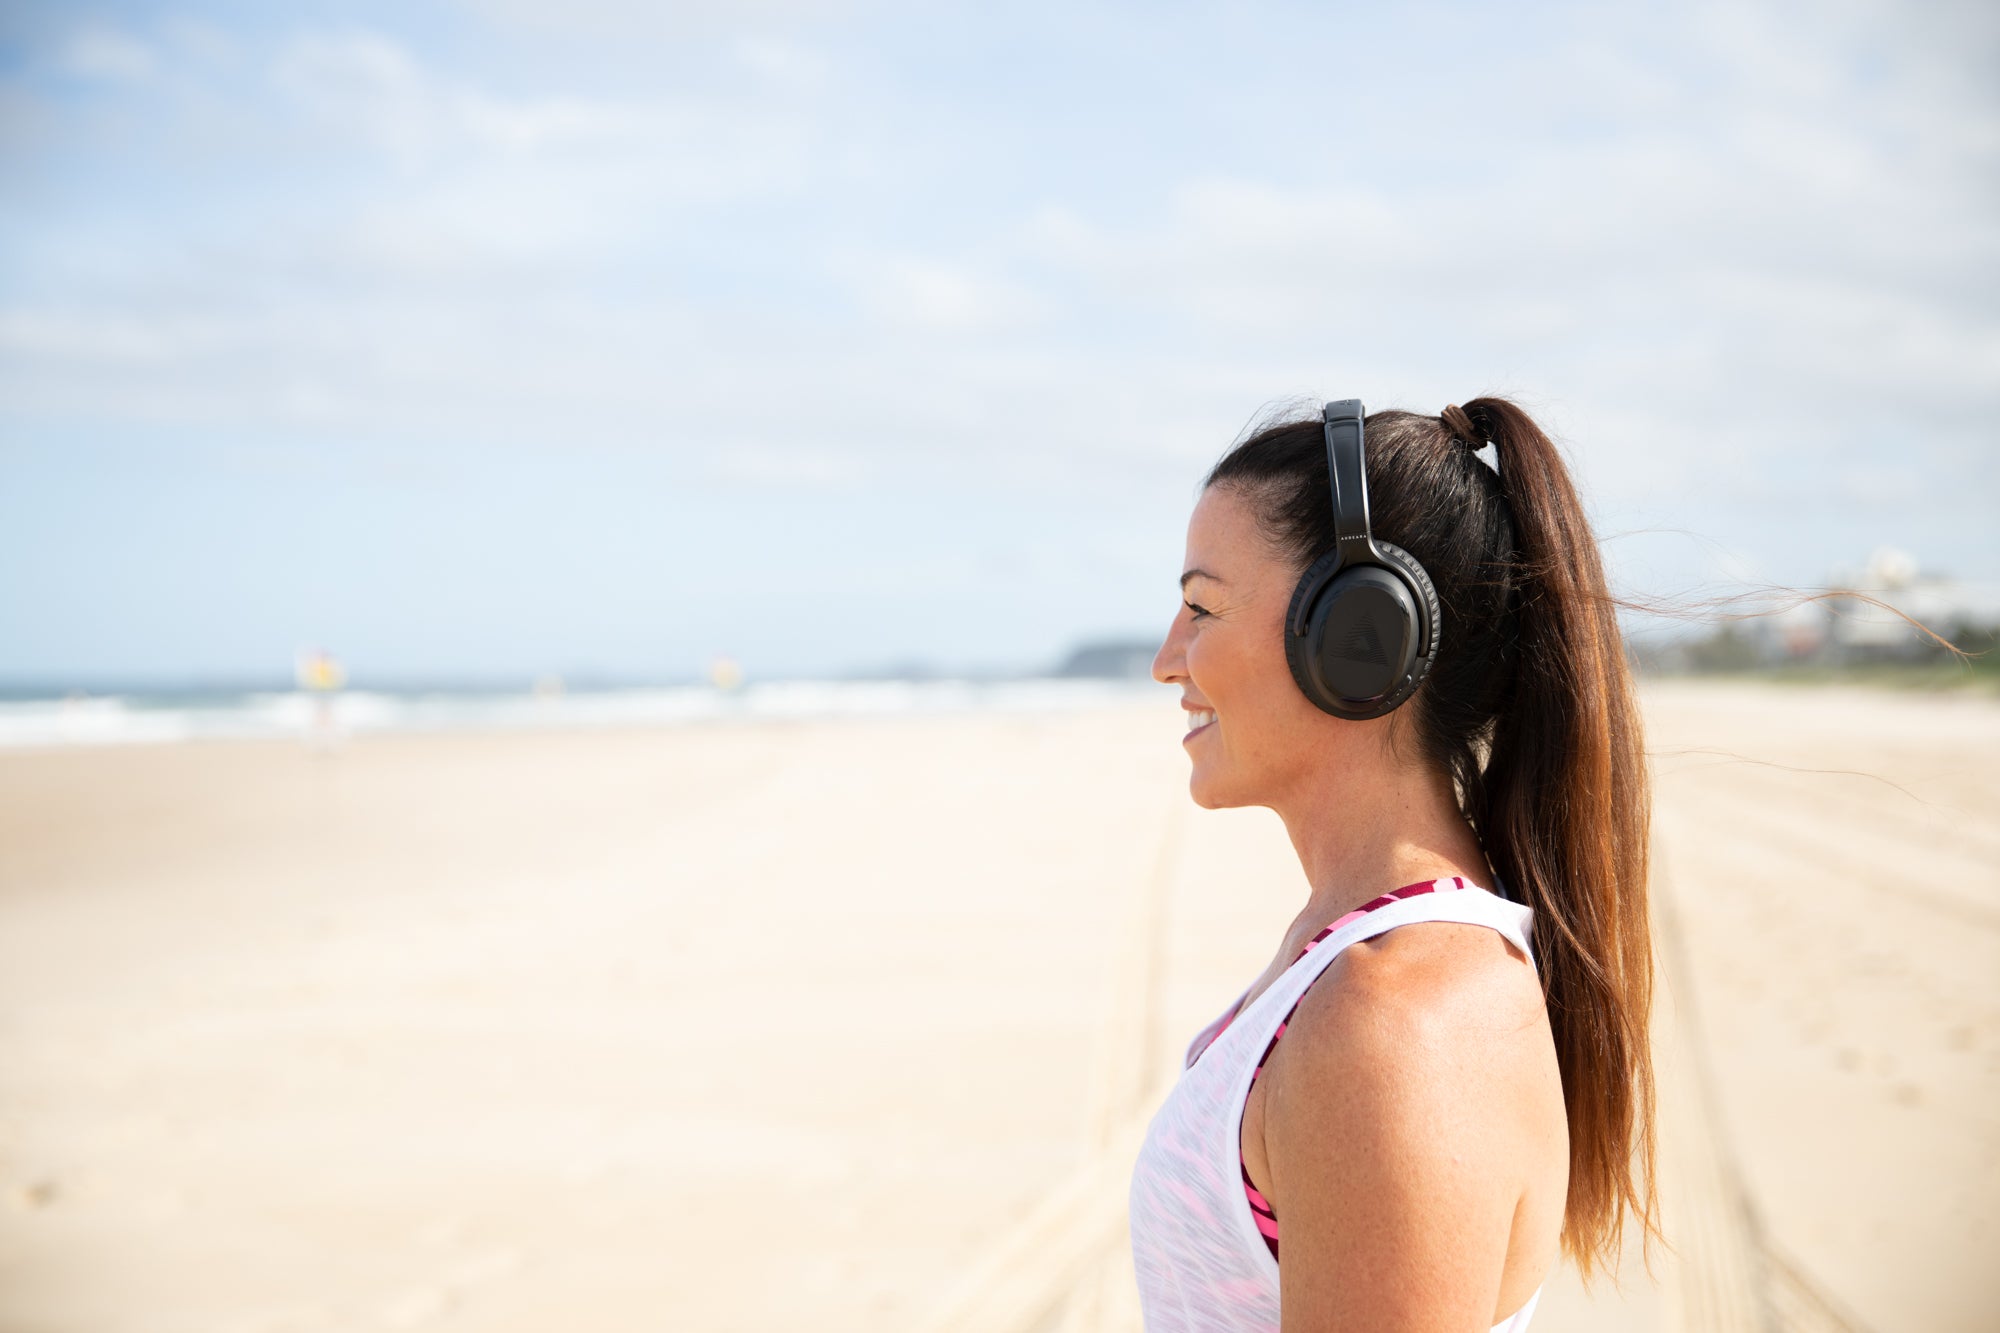 A woman smiling and wearing her Audeara headphones standing on the beach and looking out at the ocean